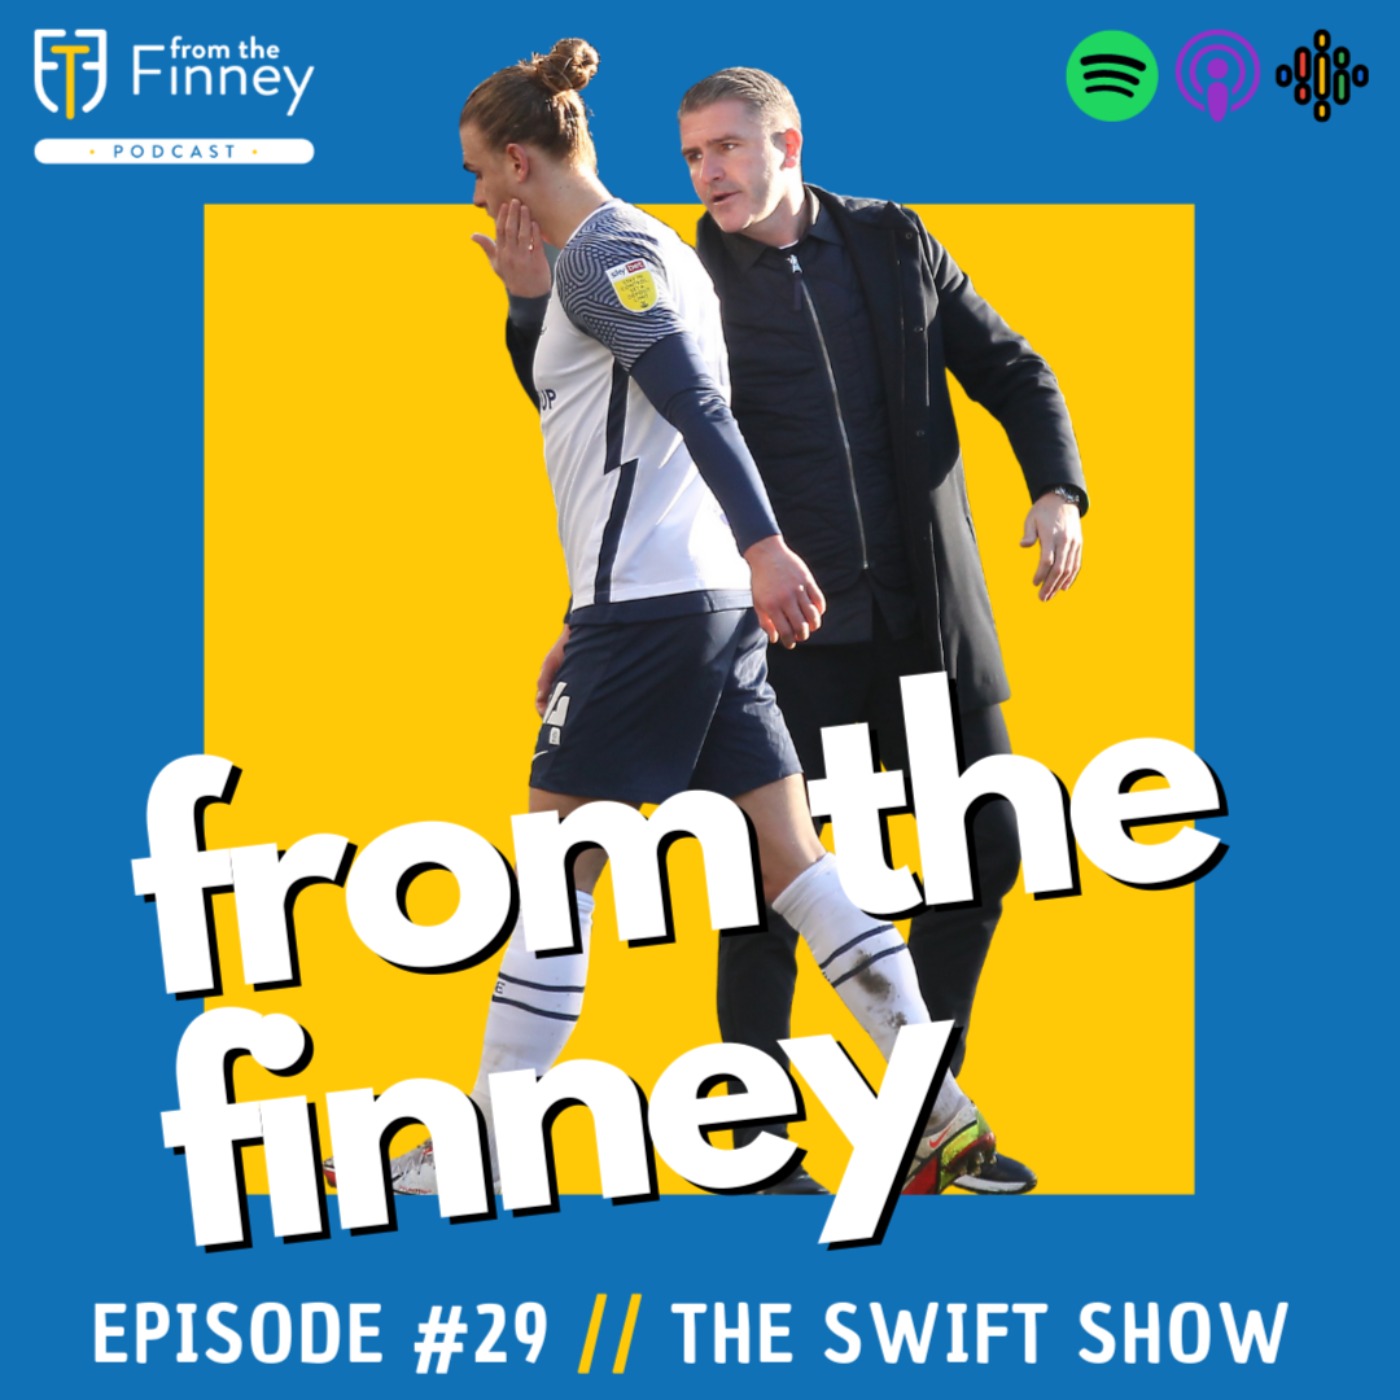 Episode #29 // The Swift Show // From the Finney Podcast